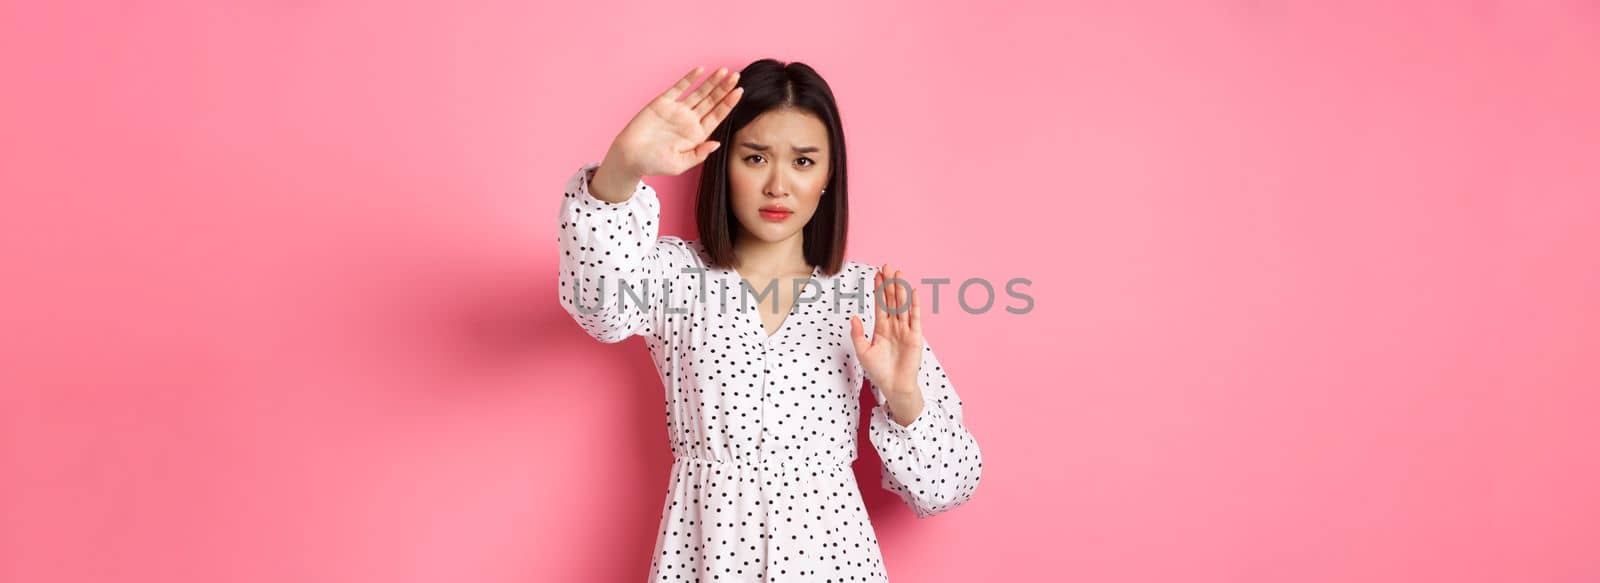 Timid and scared asian woman defending herself, raising arms in protection, victim being attacked, standing over pink background.